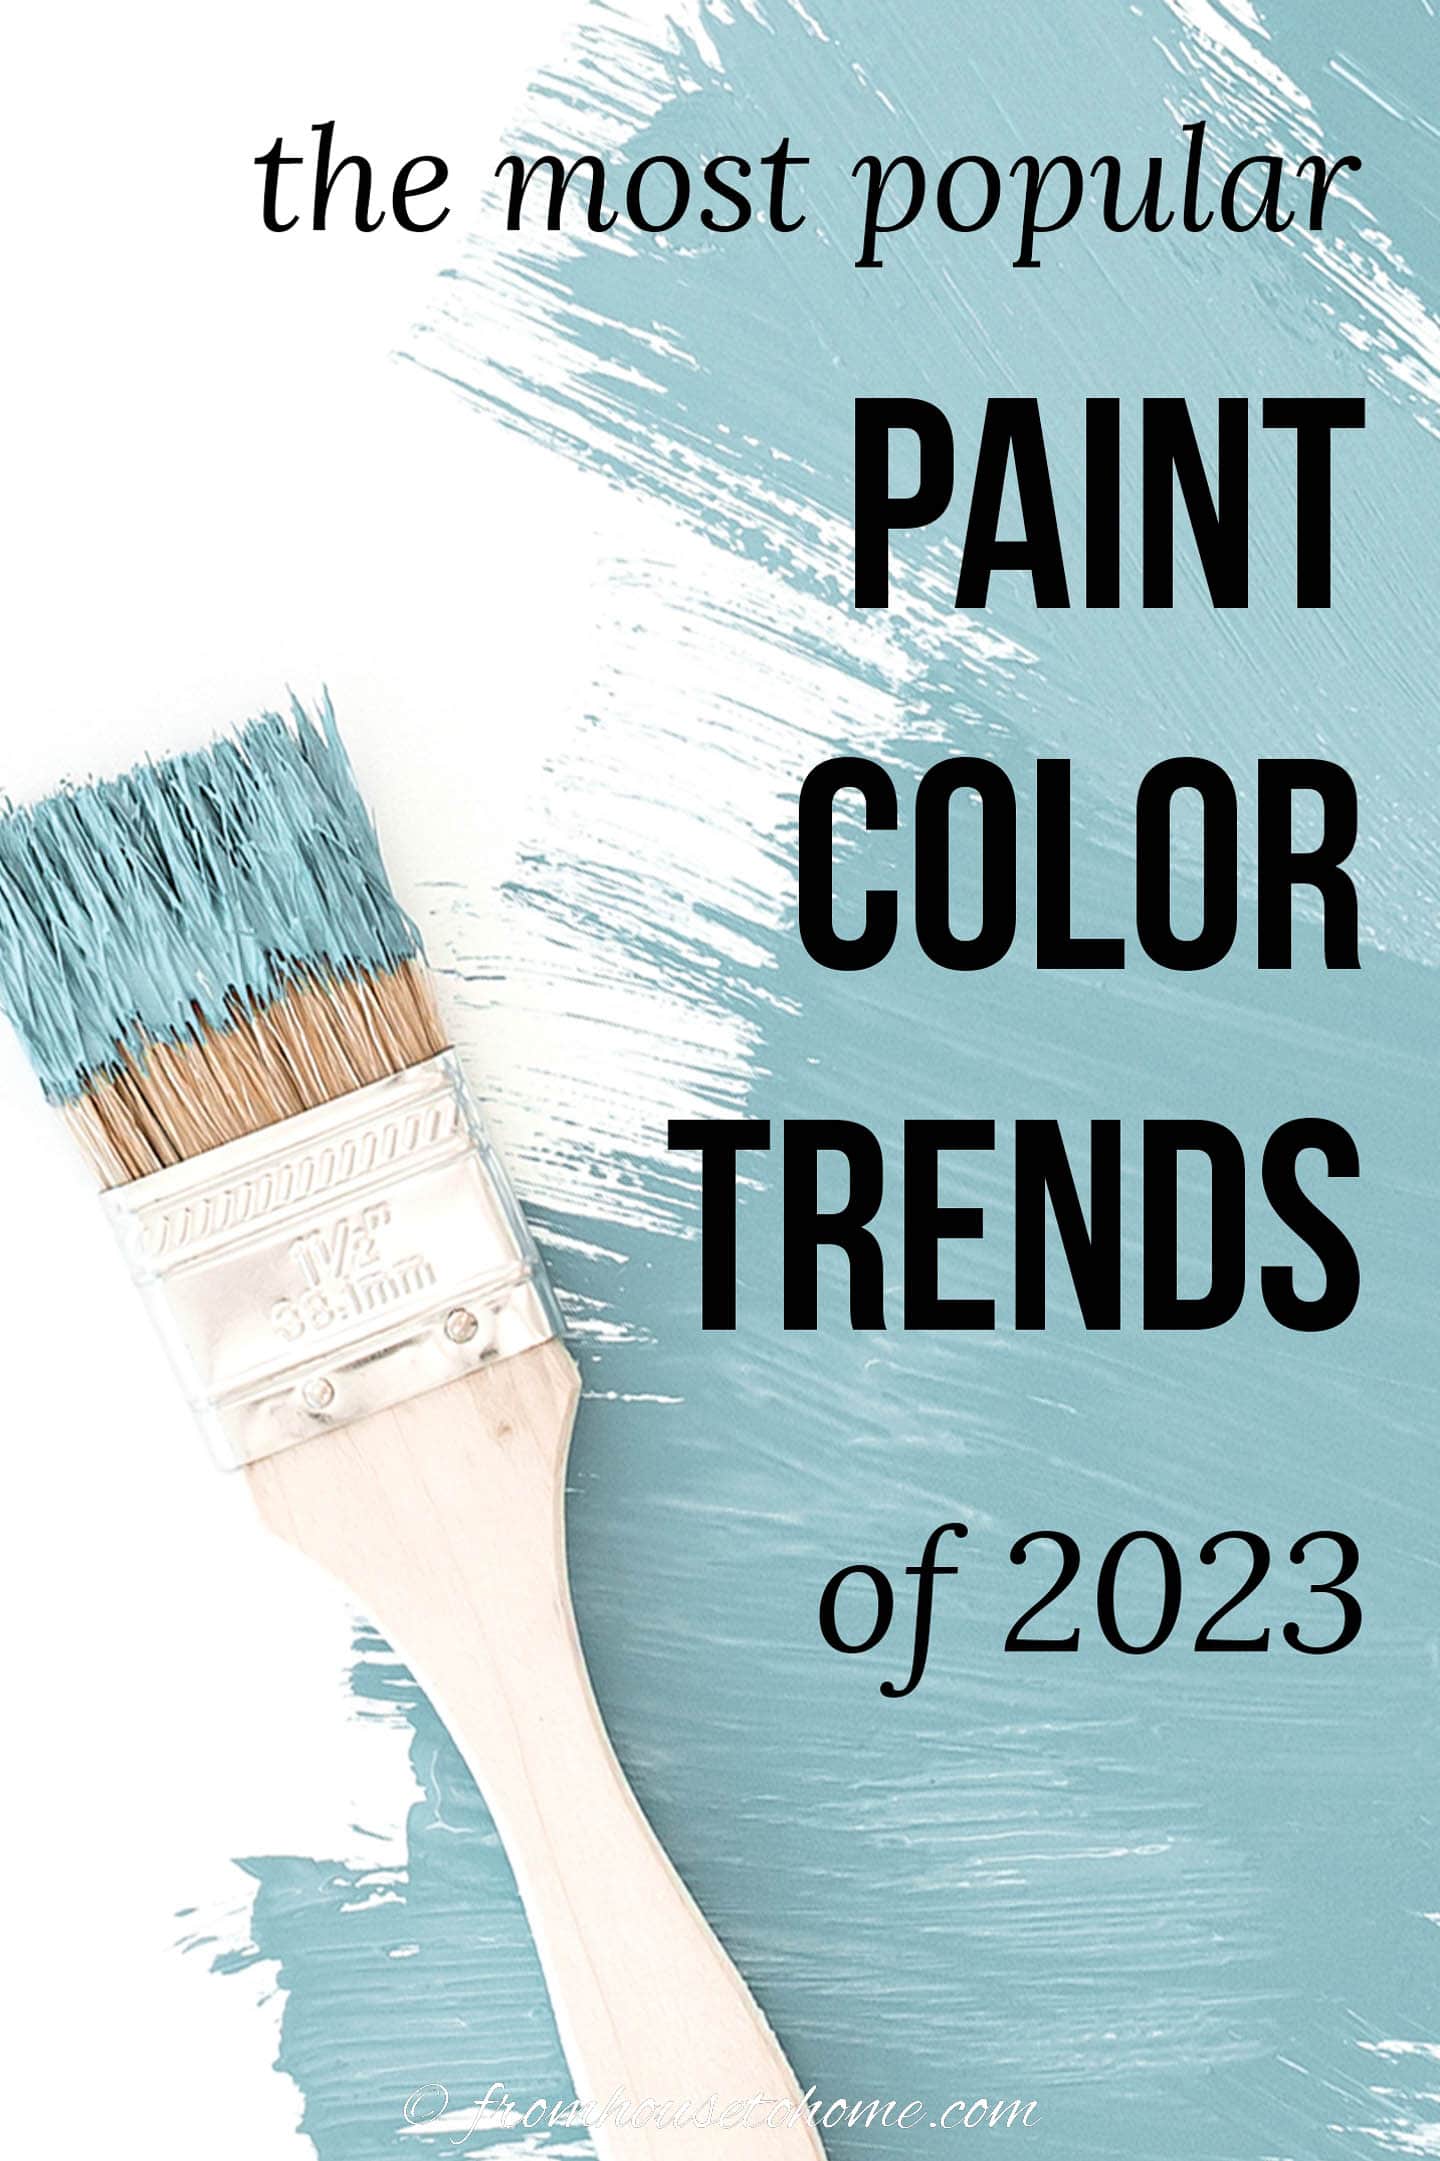 Picture of a paint brush and paint with the text "the most popular paint color trends of 2021"